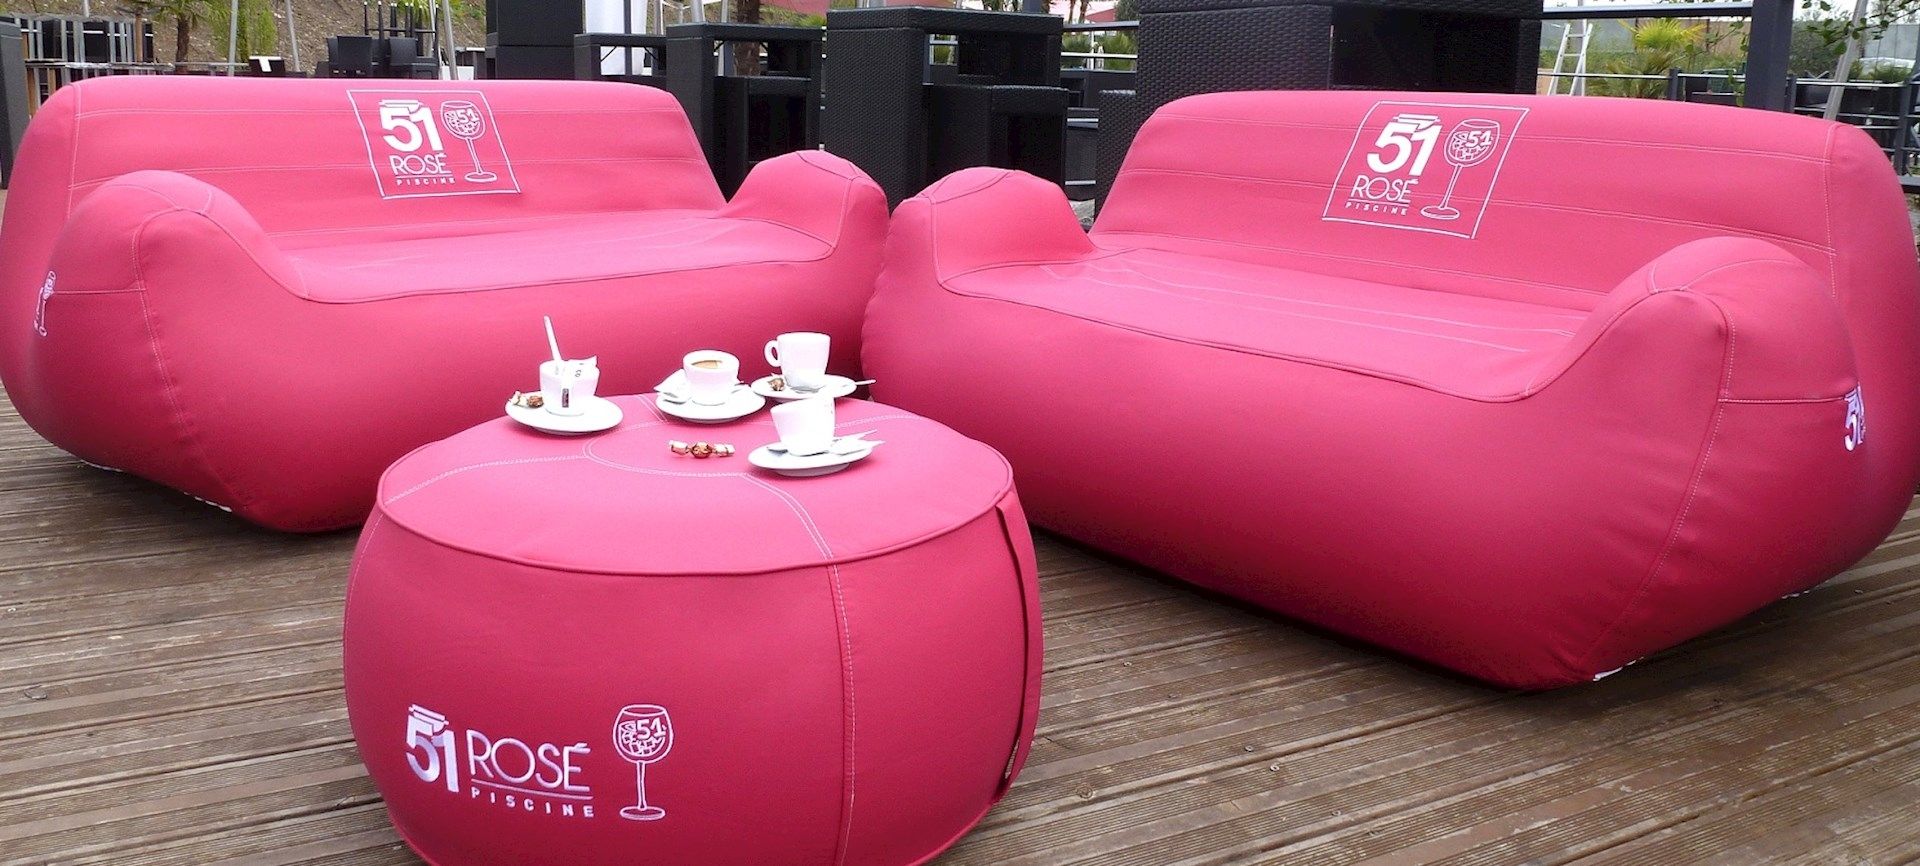 Wonderful Inflatable Furniture Chairs And Sofas Surripui Pertaining To Inflatable Sofas And Chairs (View 1 of 15)